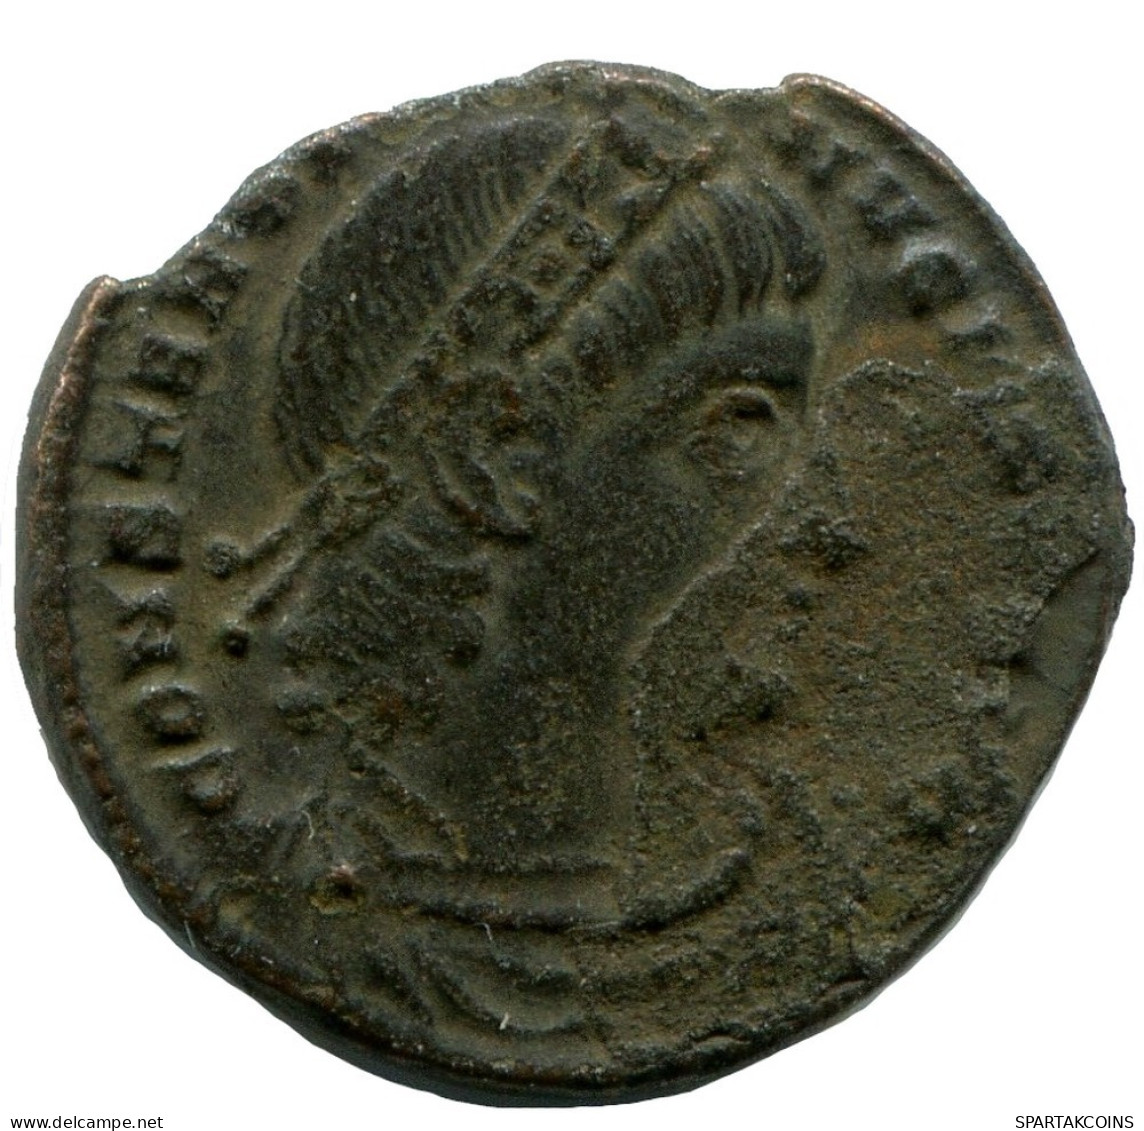 CONSTANTINE I MINTED IN CONSTANTINOPLE FOUND IN IHNASYAH HOARD #ANC10781.14.E.A - L'Empire Chrétien (307 à 363)